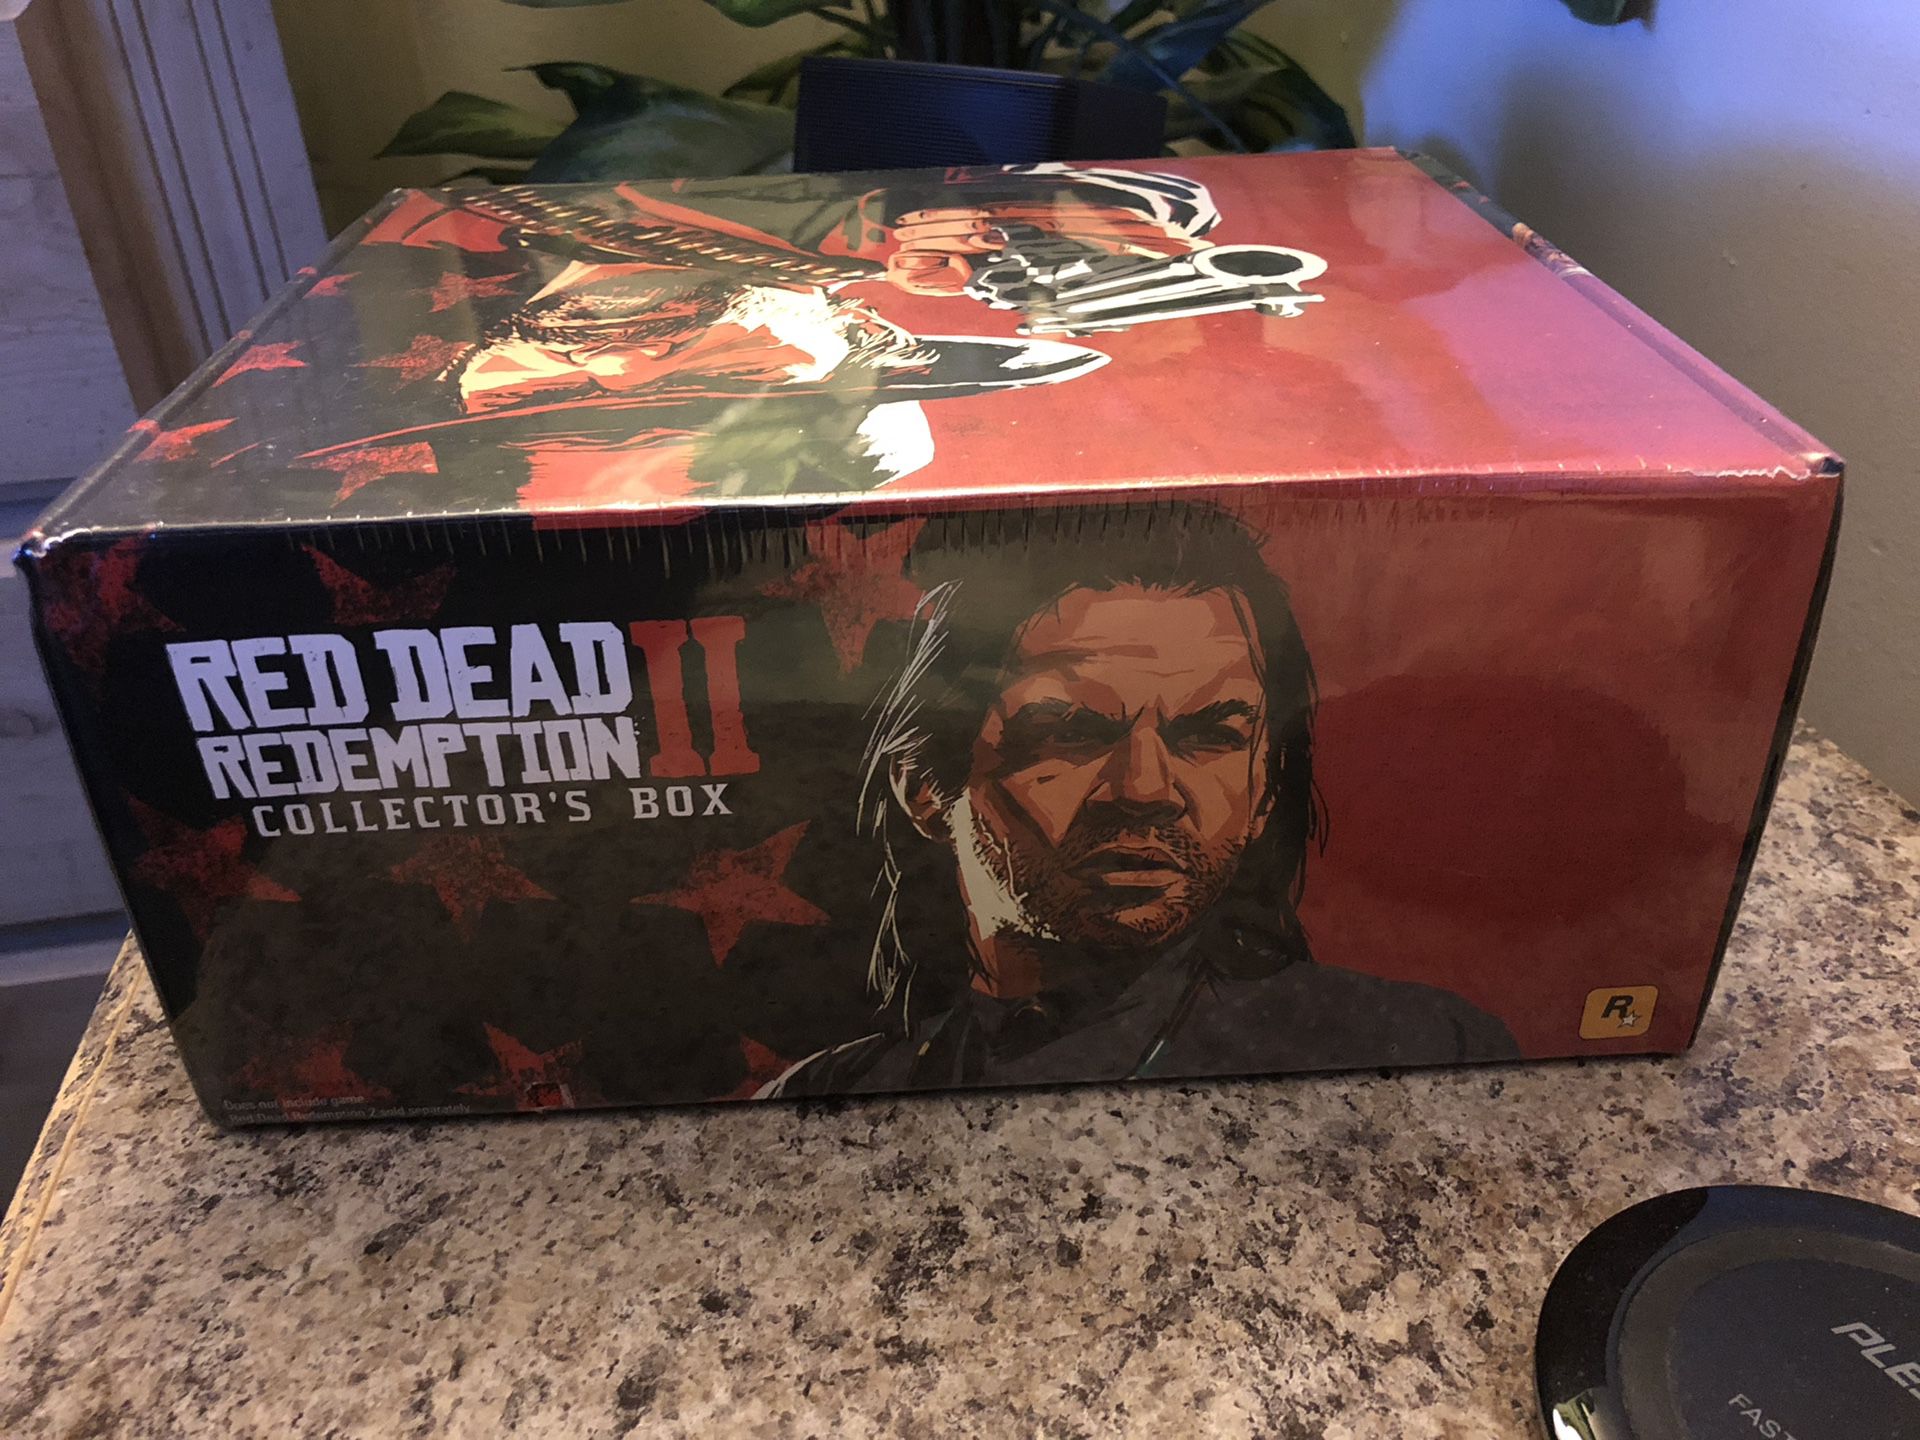 Kridt hår Efterår Red Dead Redemption 2 for Xbox One Game/ Collector's Edition Hard Cover  Strategy Guide and Collector's Edition Box (Rare Sold-Out Item)-New/Sealed  for Sale in Columbus, OH - OfferUp